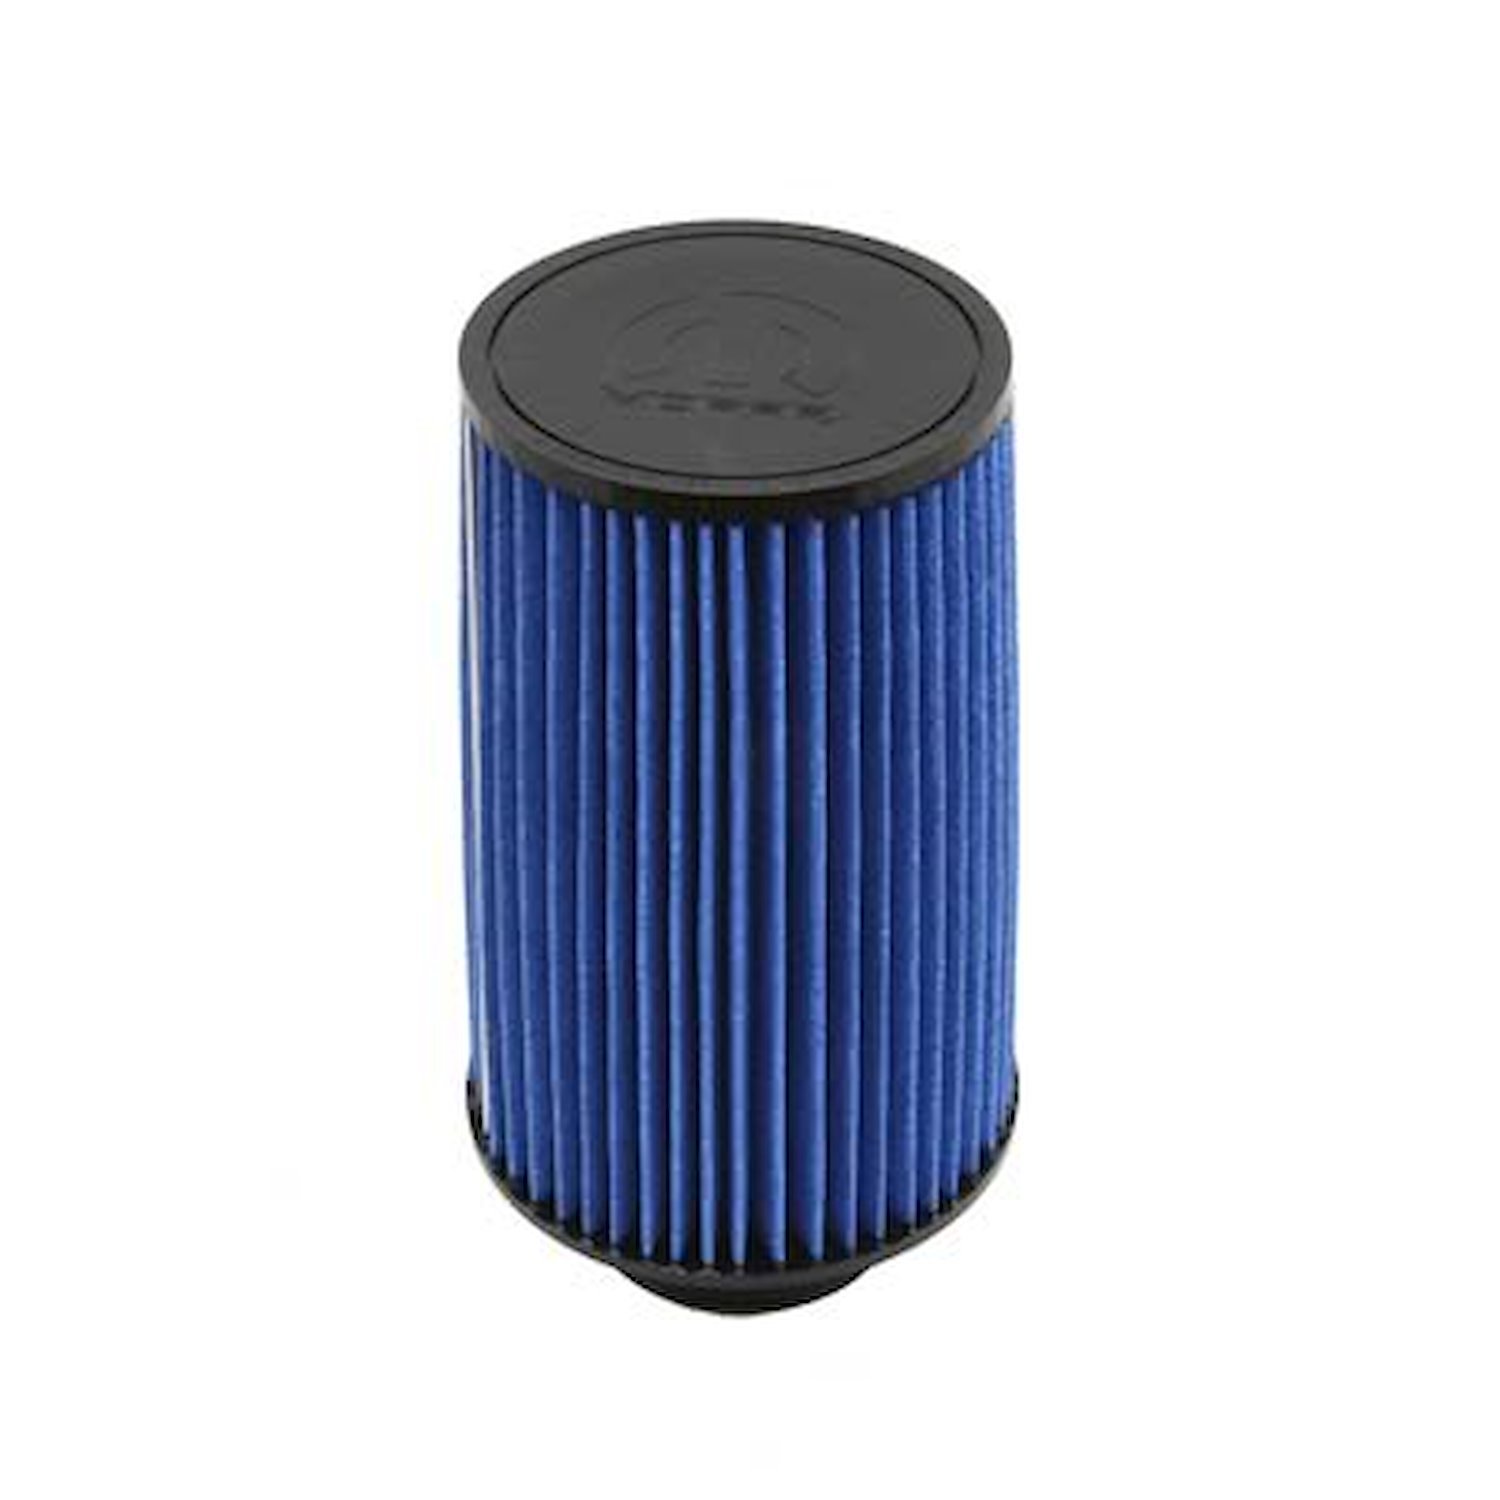 Replacement Air Filter Dry Media Filter